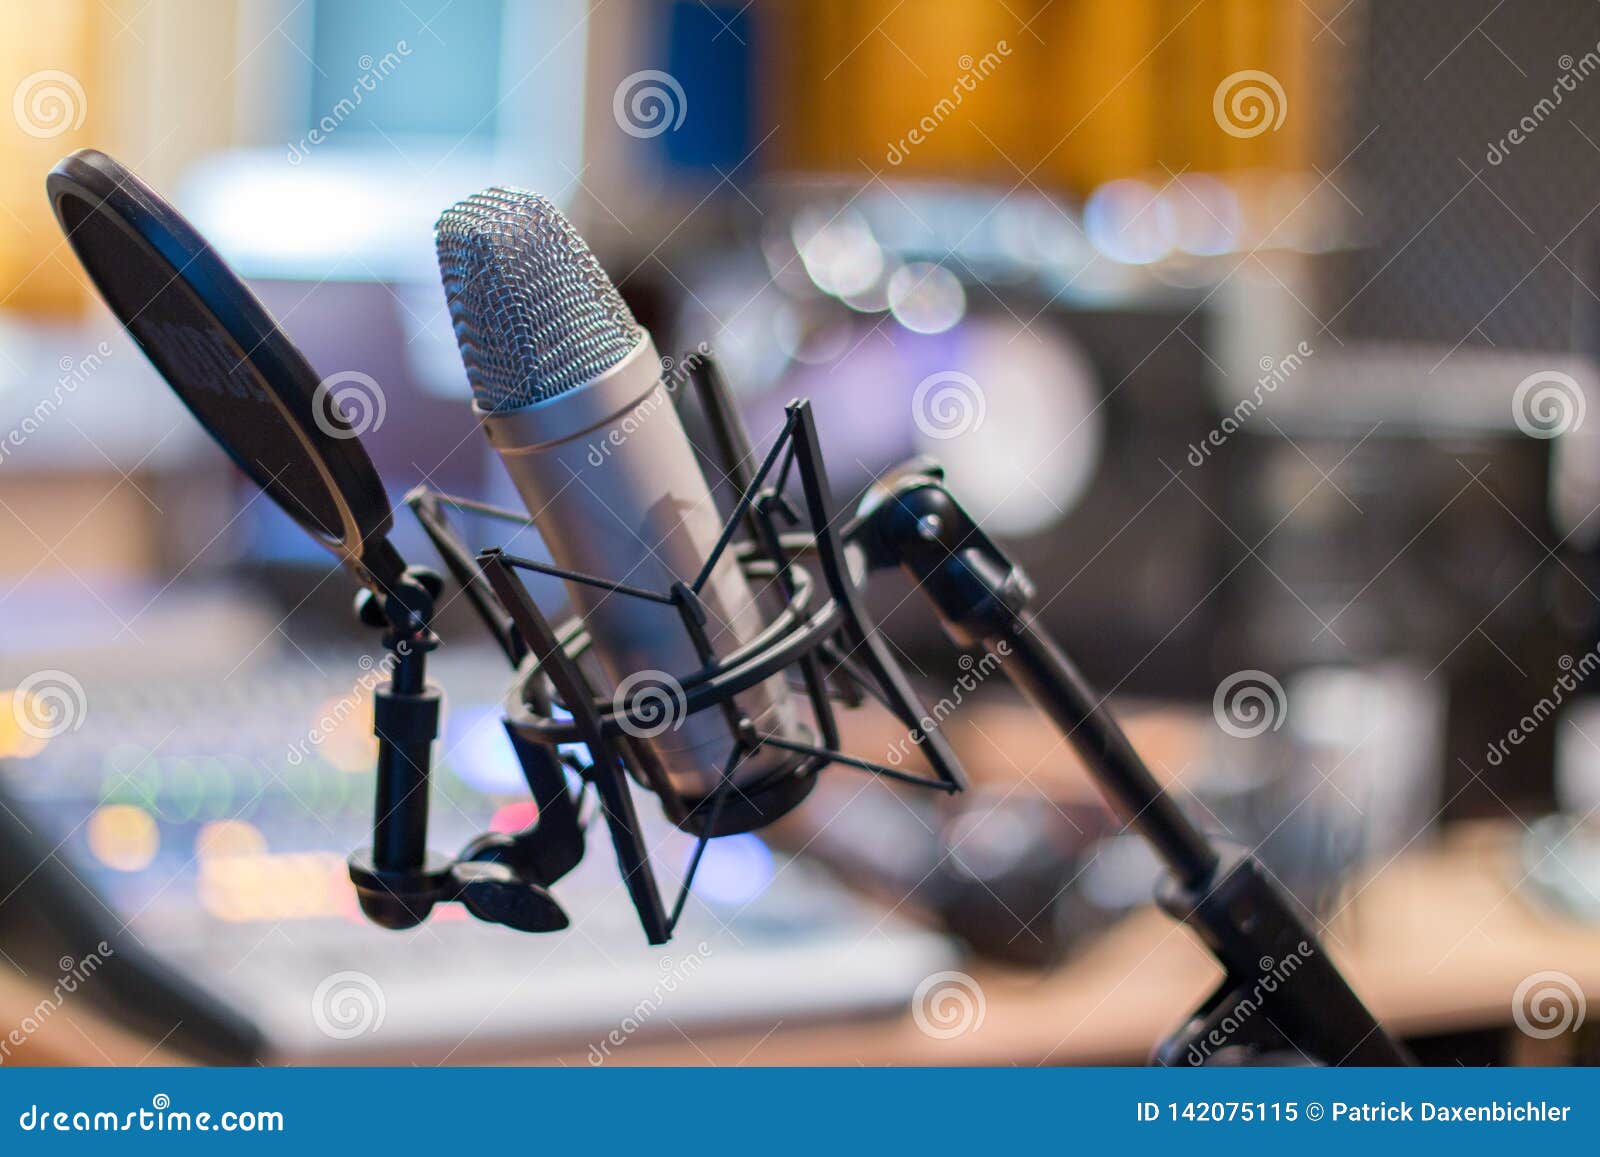 Microphone in a Professional Recording or Radio Studio, Equipment in the  Blurry Background Stock Image - Image of microphone, clubbing: 142075115